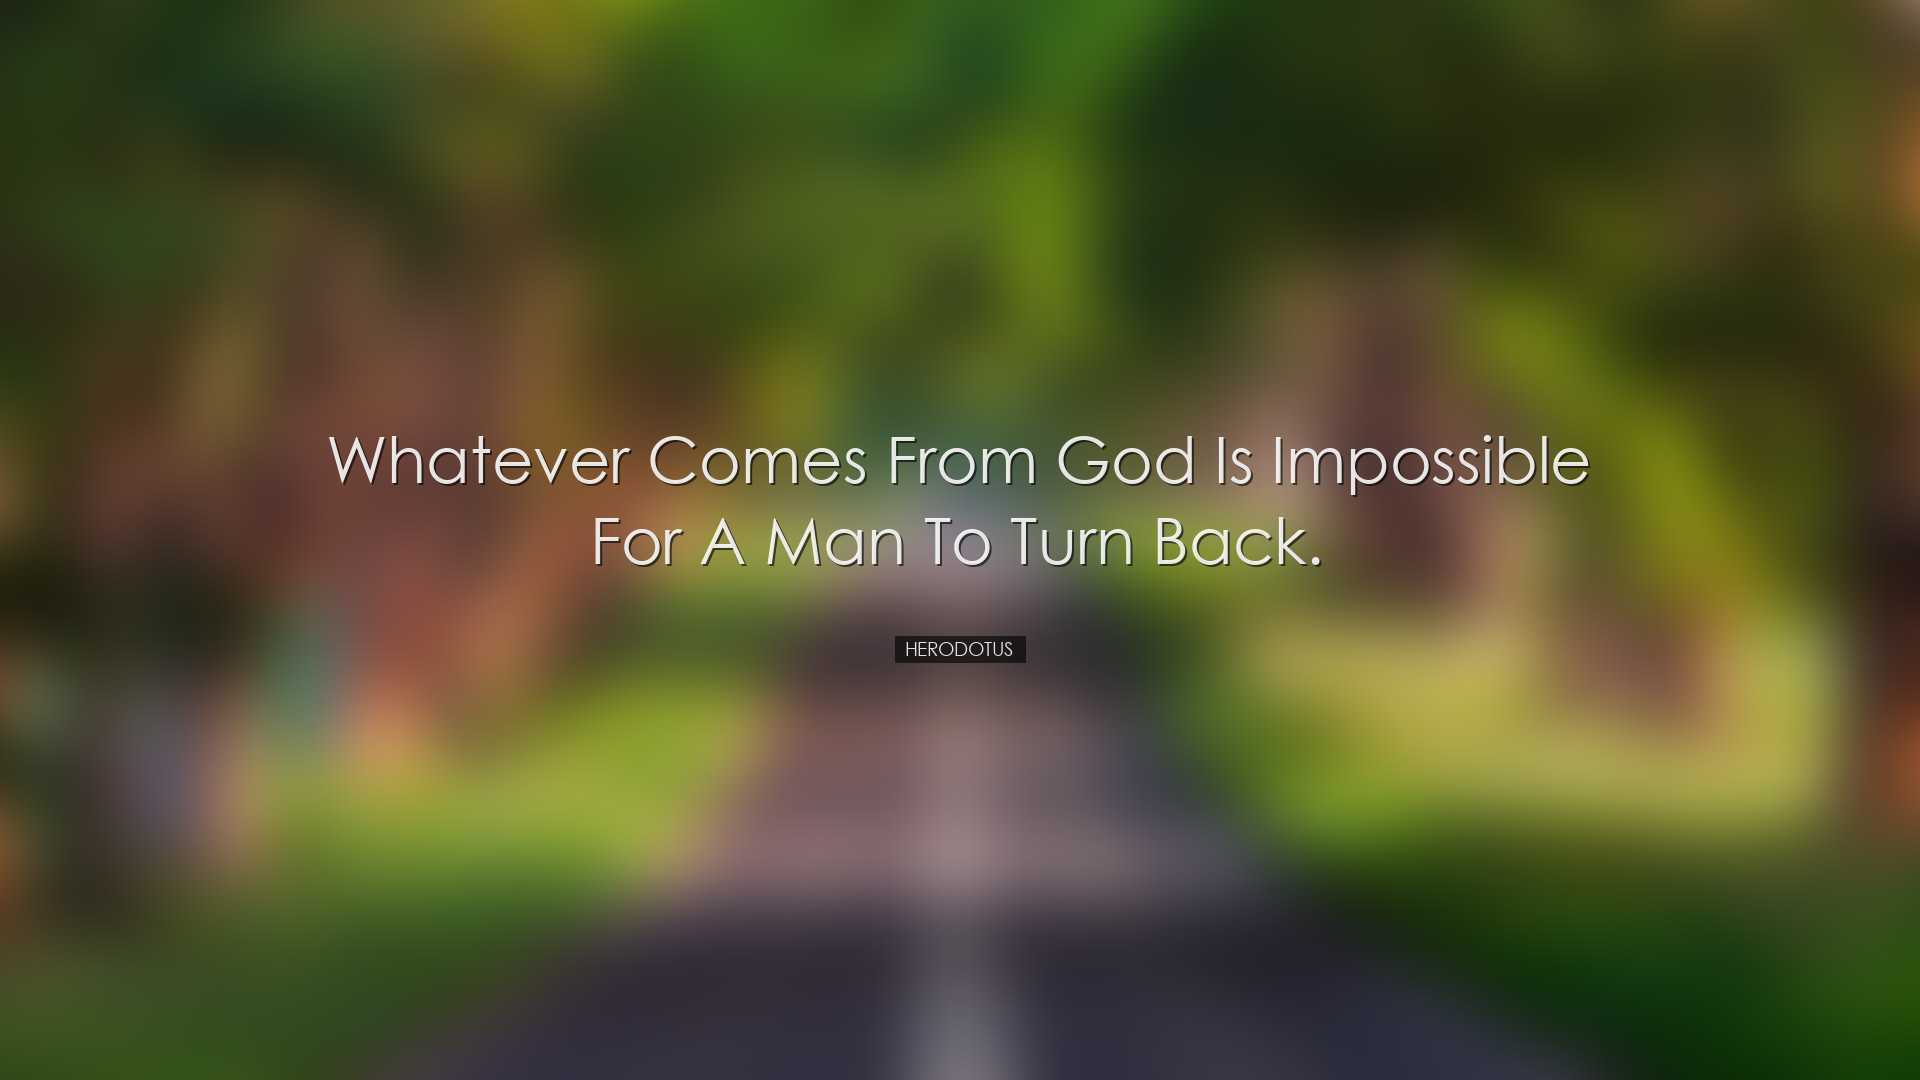 Whatever comes from God is impossible for a man to turn back. - He